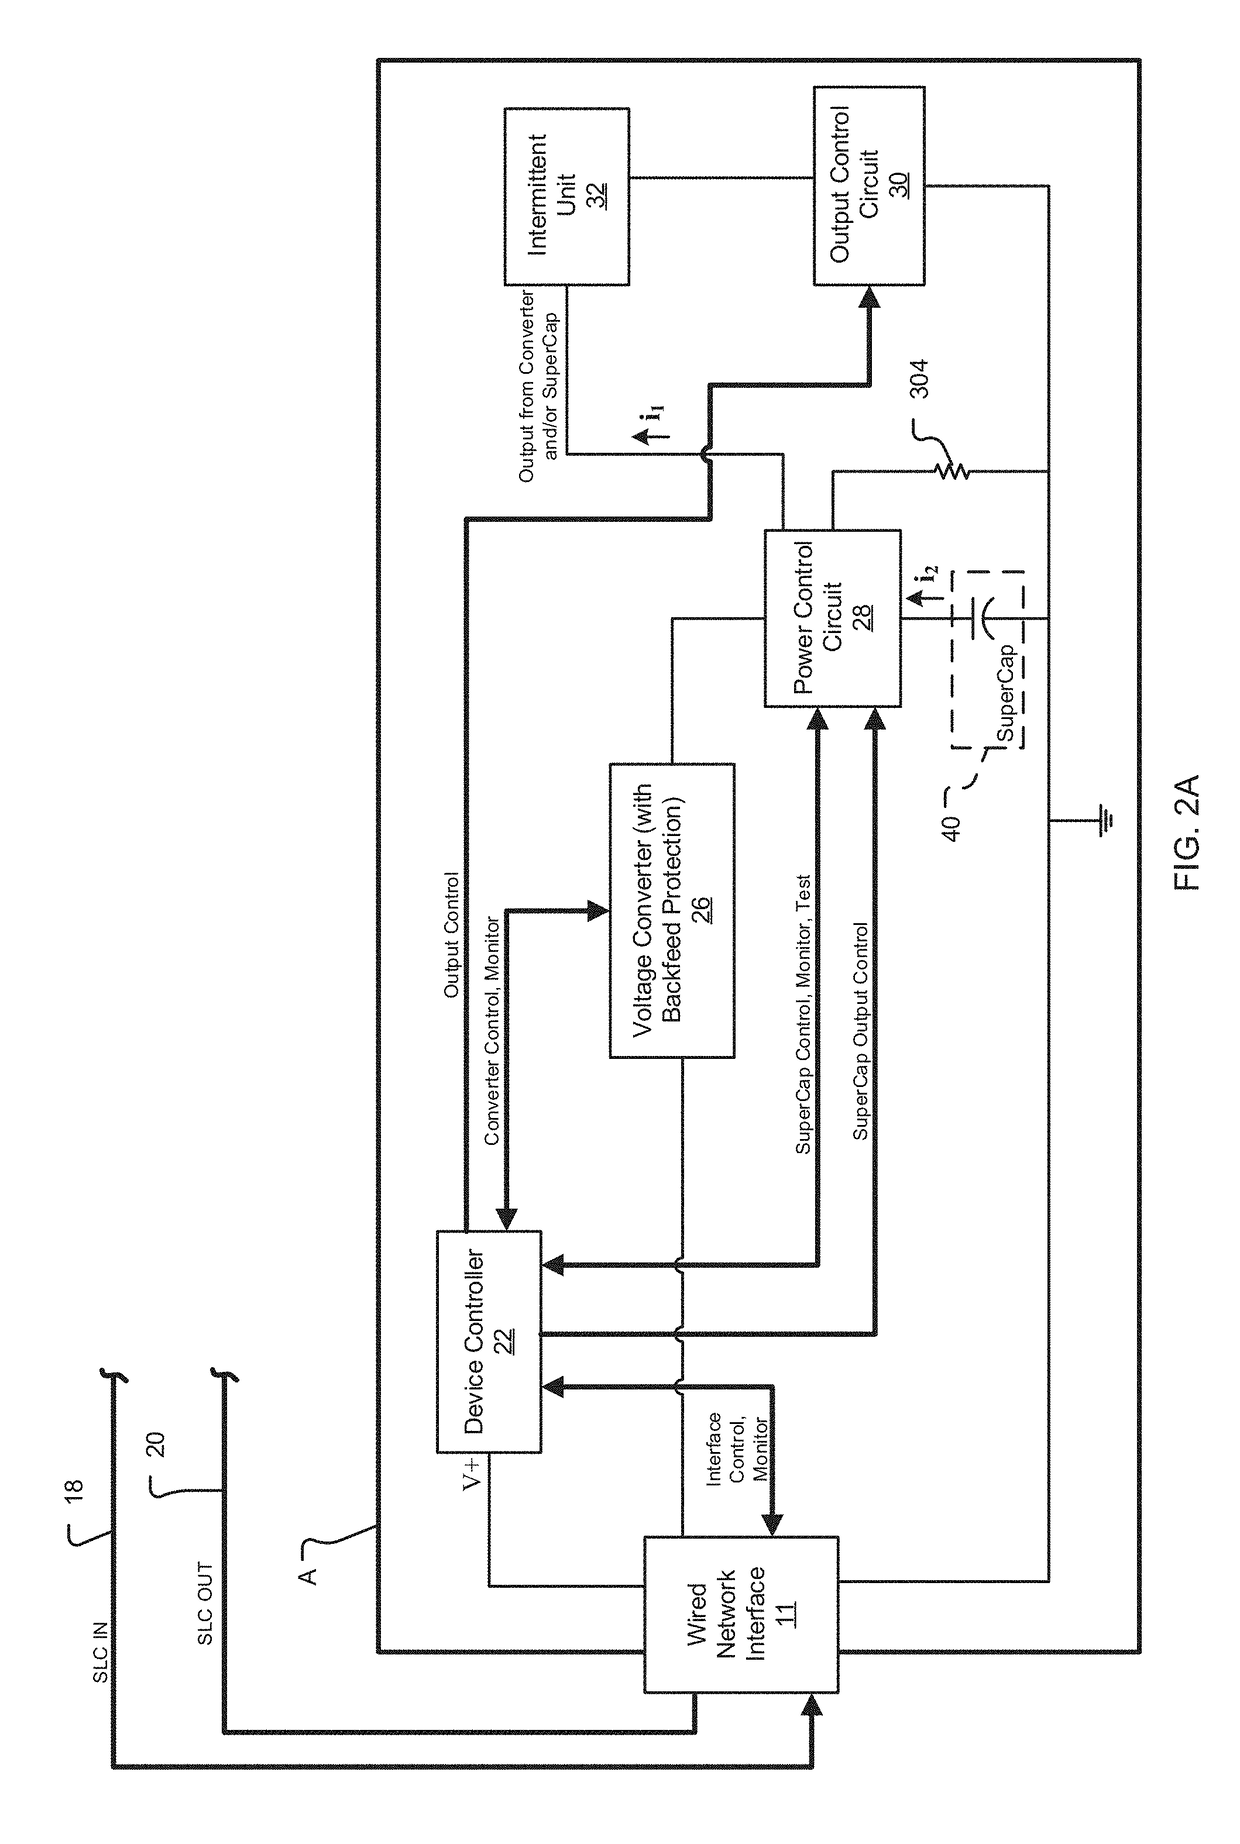 System and method for providing temporary power to intermittent units